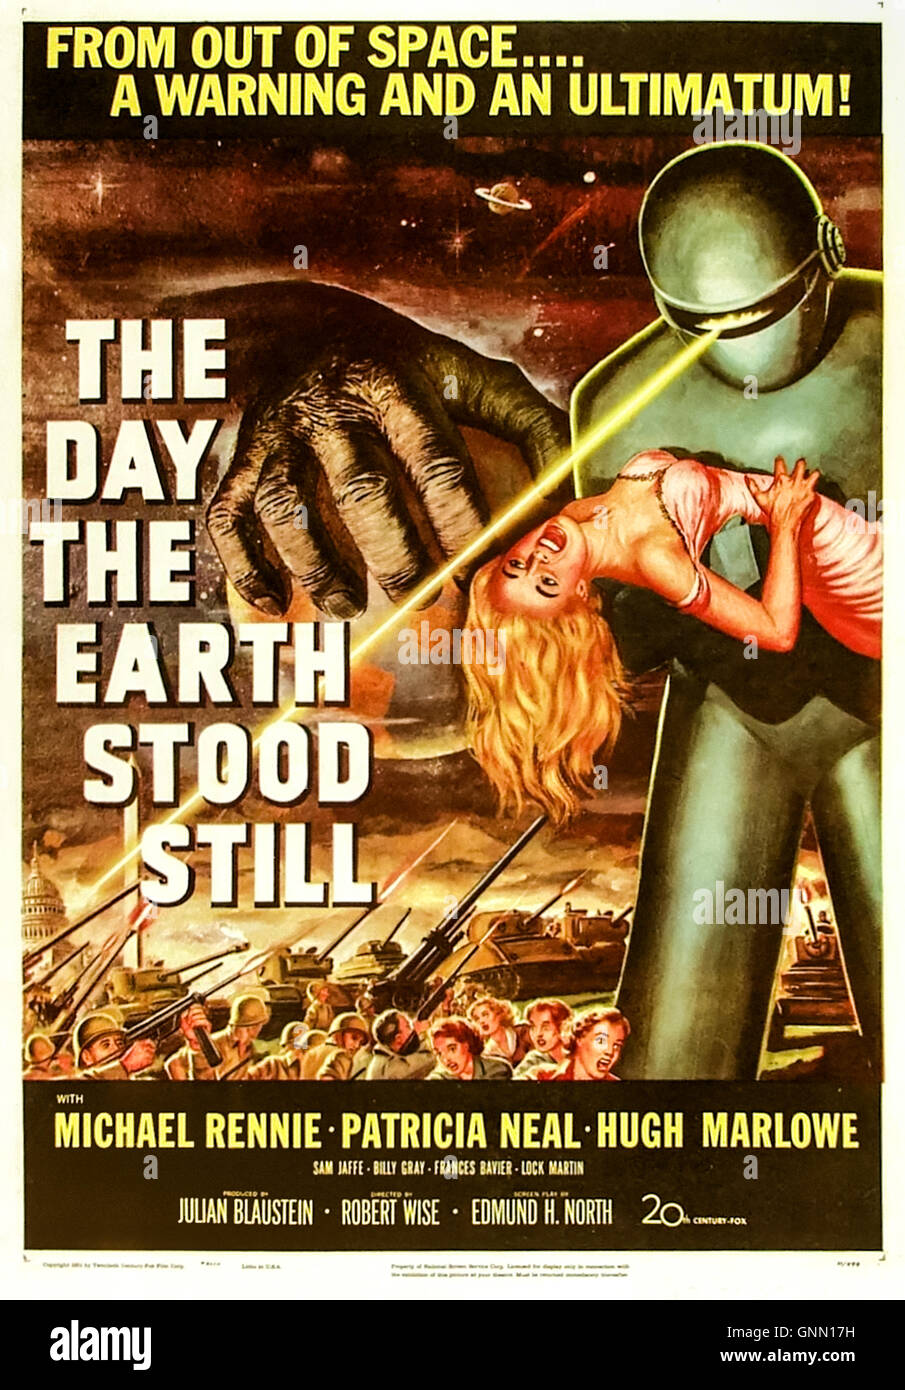 The Day the Earth Stood Still (1951) directed by Robert Wise and starring Michael Rennie, Patricia Neal and Hugh Marlowe.  An alien tells Earth to live in peace and that an intergalactic police force will be watching, Klaatu barada nikto! See description for more information. Stock Photo